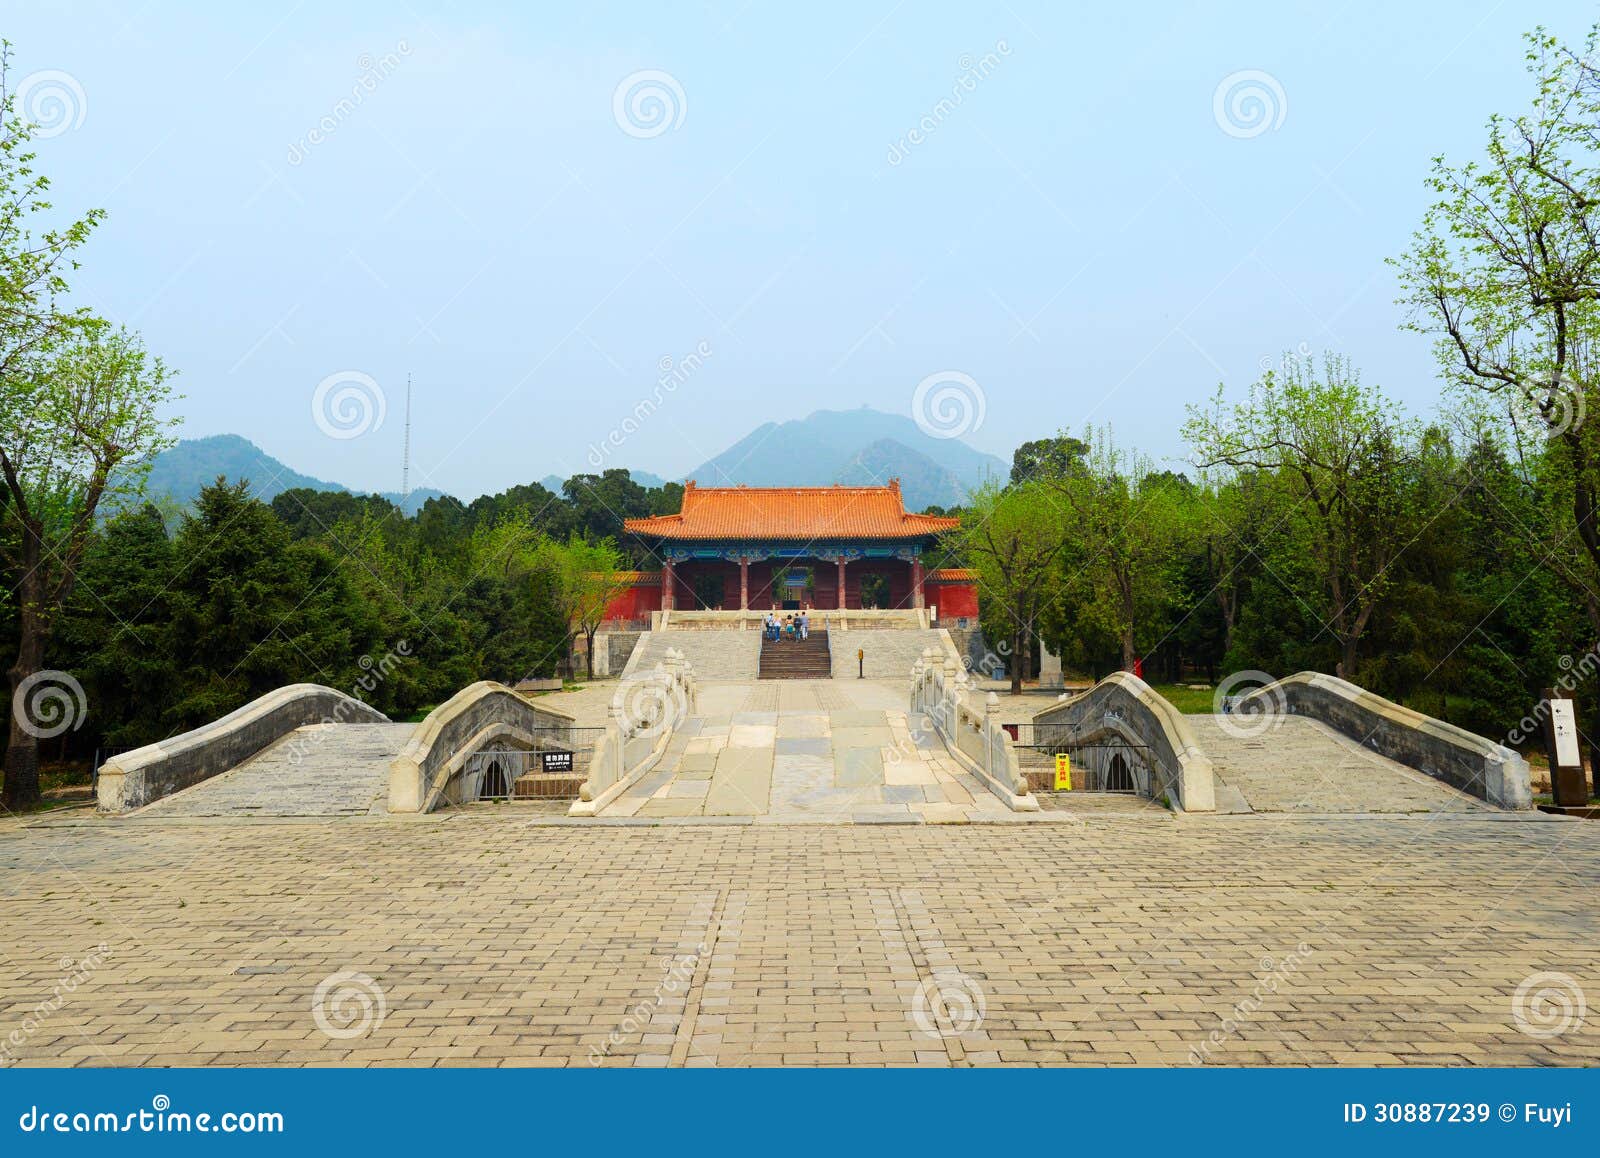 zhao ling ming tombs